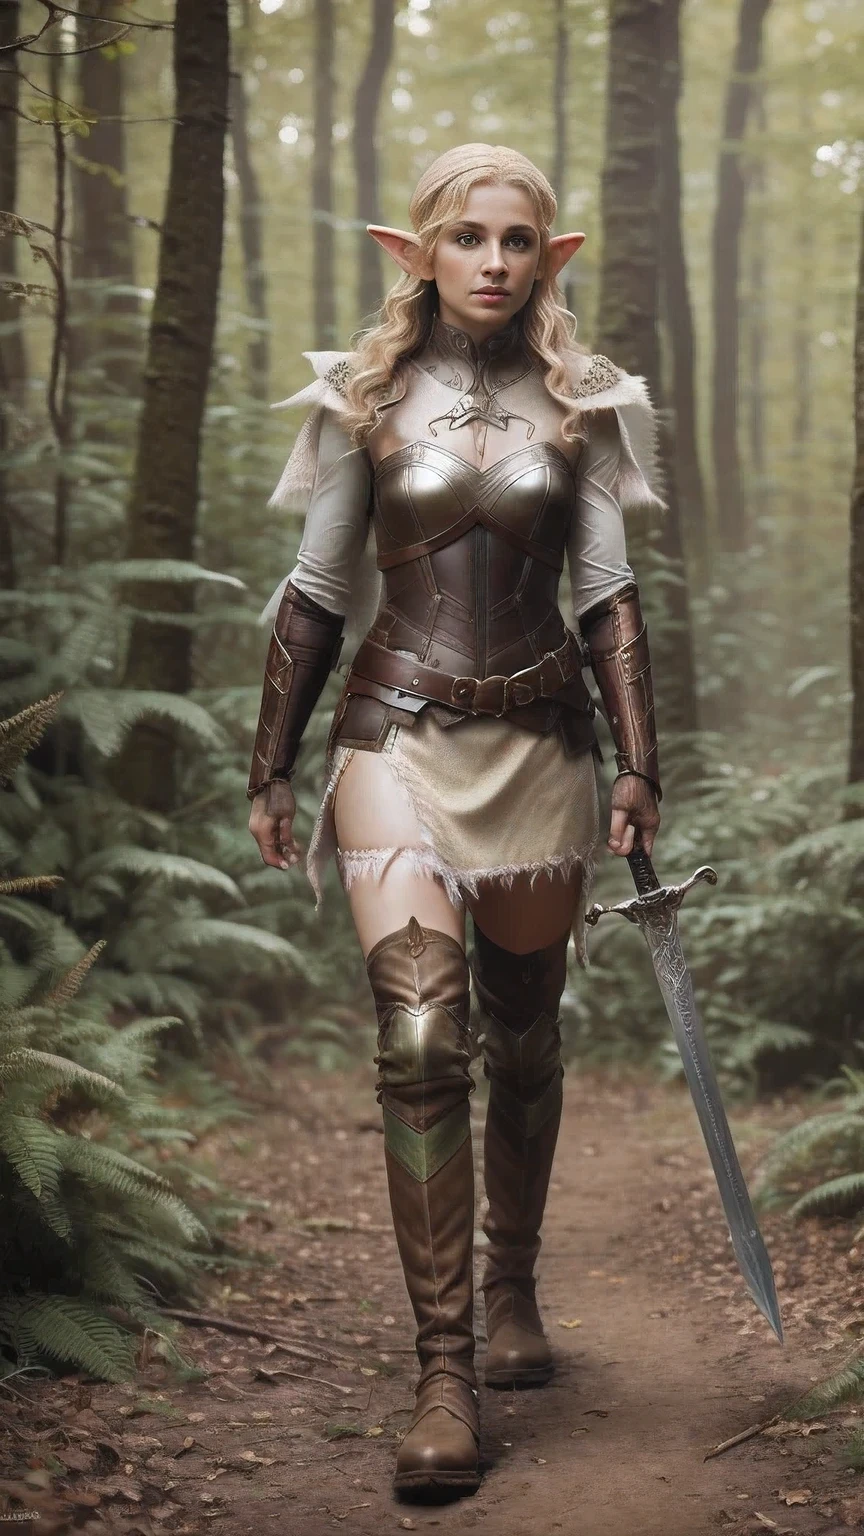 ((young elf girl )): blonde wavy short hair,freckles on the face, , wearing light dark brown leather armor ,Leather Bracers, high leather boots, Tolkien fantasy style, elf, sneaks through the bushes in the forest ,holding a sword in his hands, Edge of the forest, realistic scene, Photorealism,8k rendering,